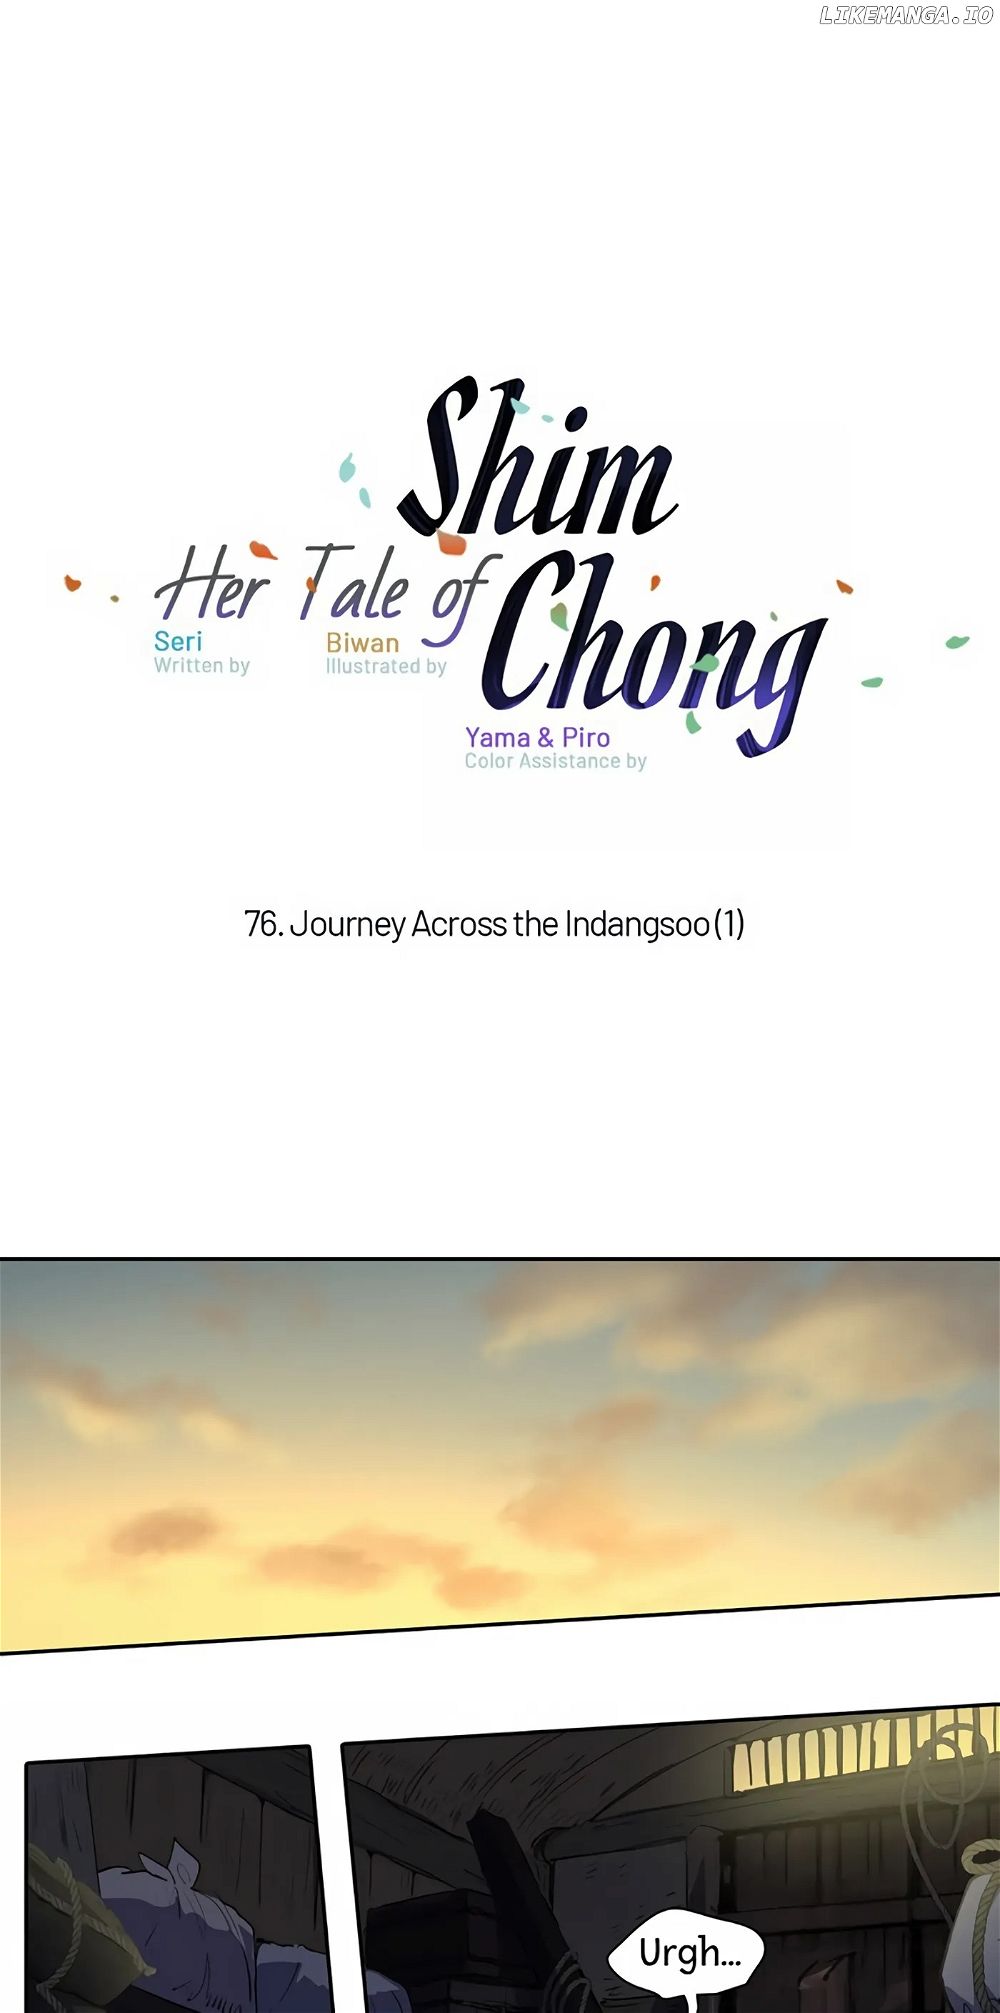 Her Tale of Shim Chong Chapter 76 - Page 1